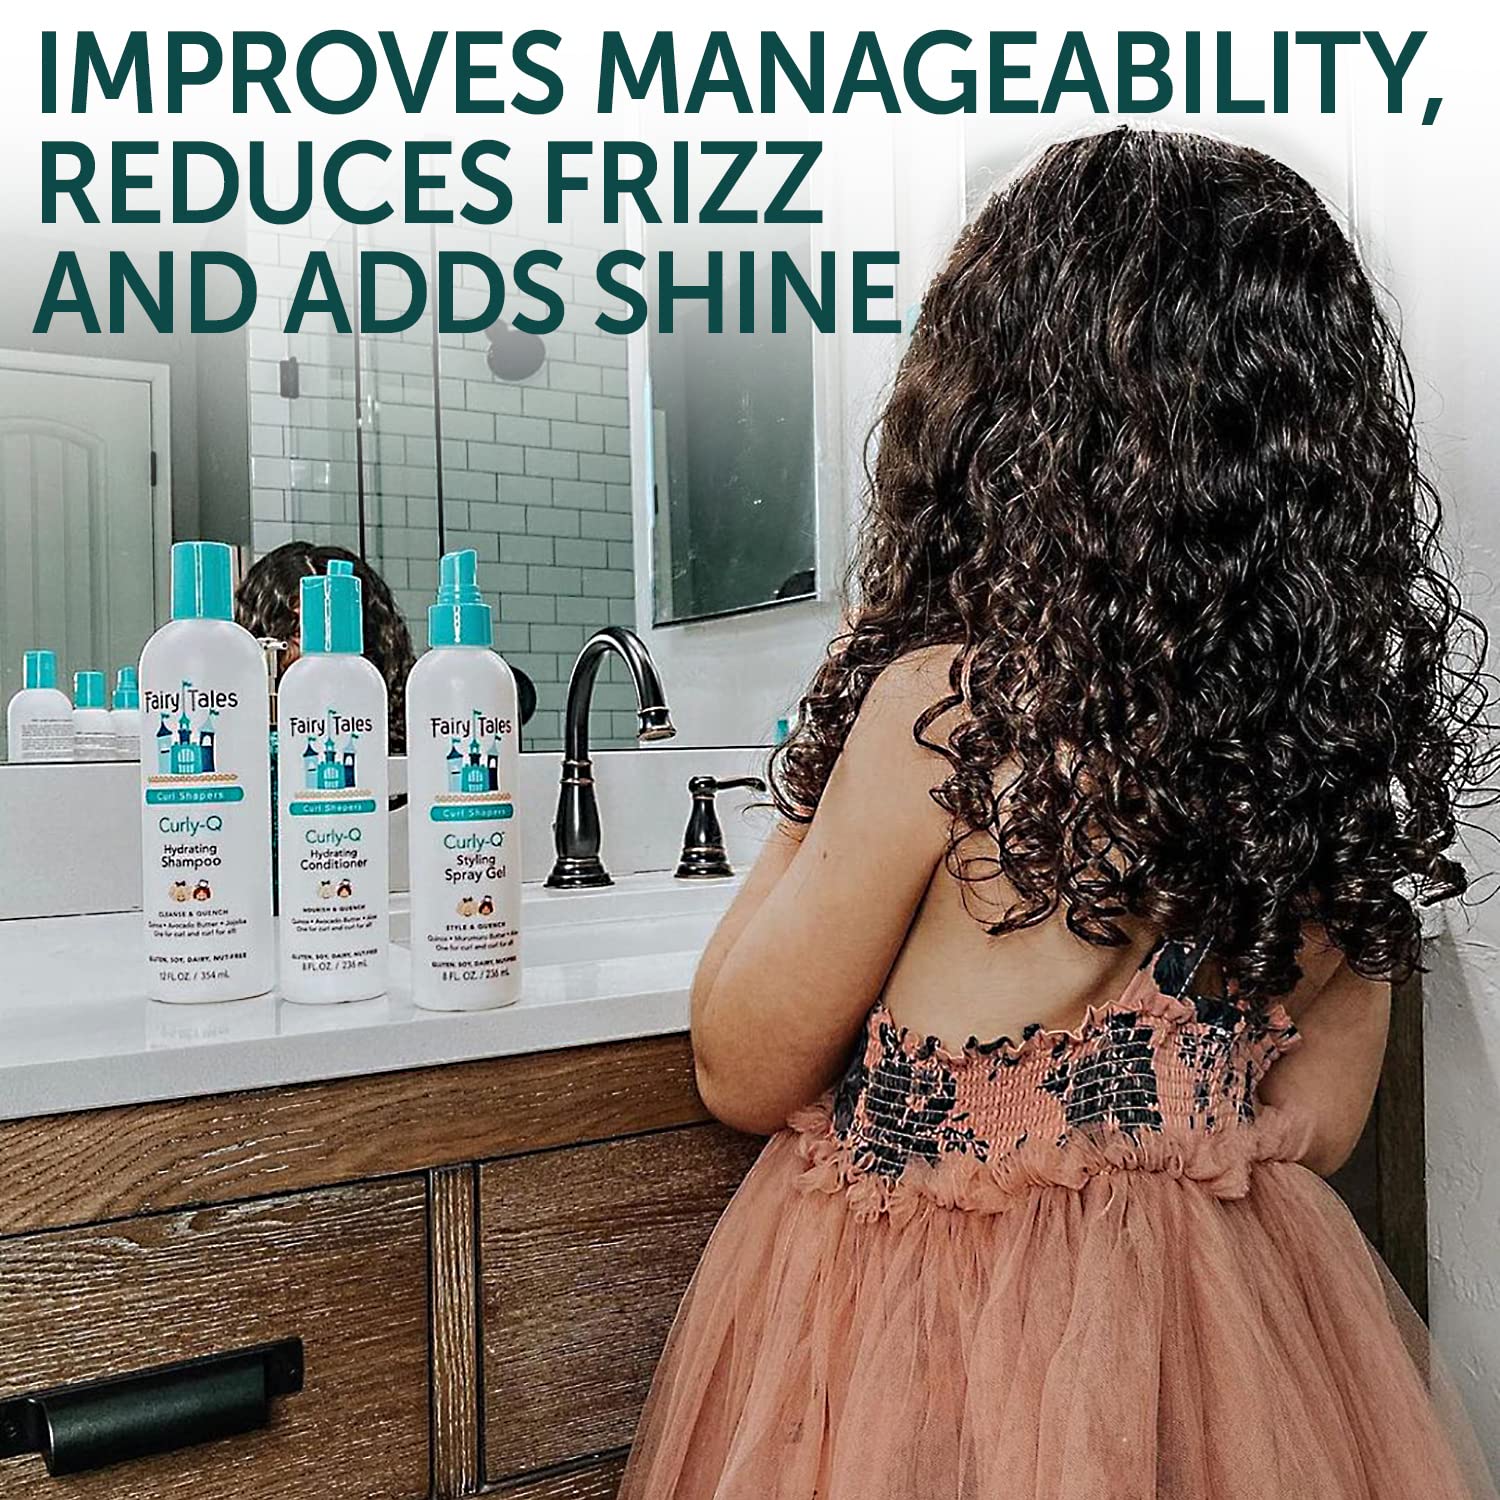 Fairy Tales Curly Q Kids Shampoo for Curly Hair - Hydrating Kids Hair Shampoo for all Types of Curls Including Multi Cultural Hair- Paraben Free, Sulfate Free, Gluten and Nut Free - 12 oz